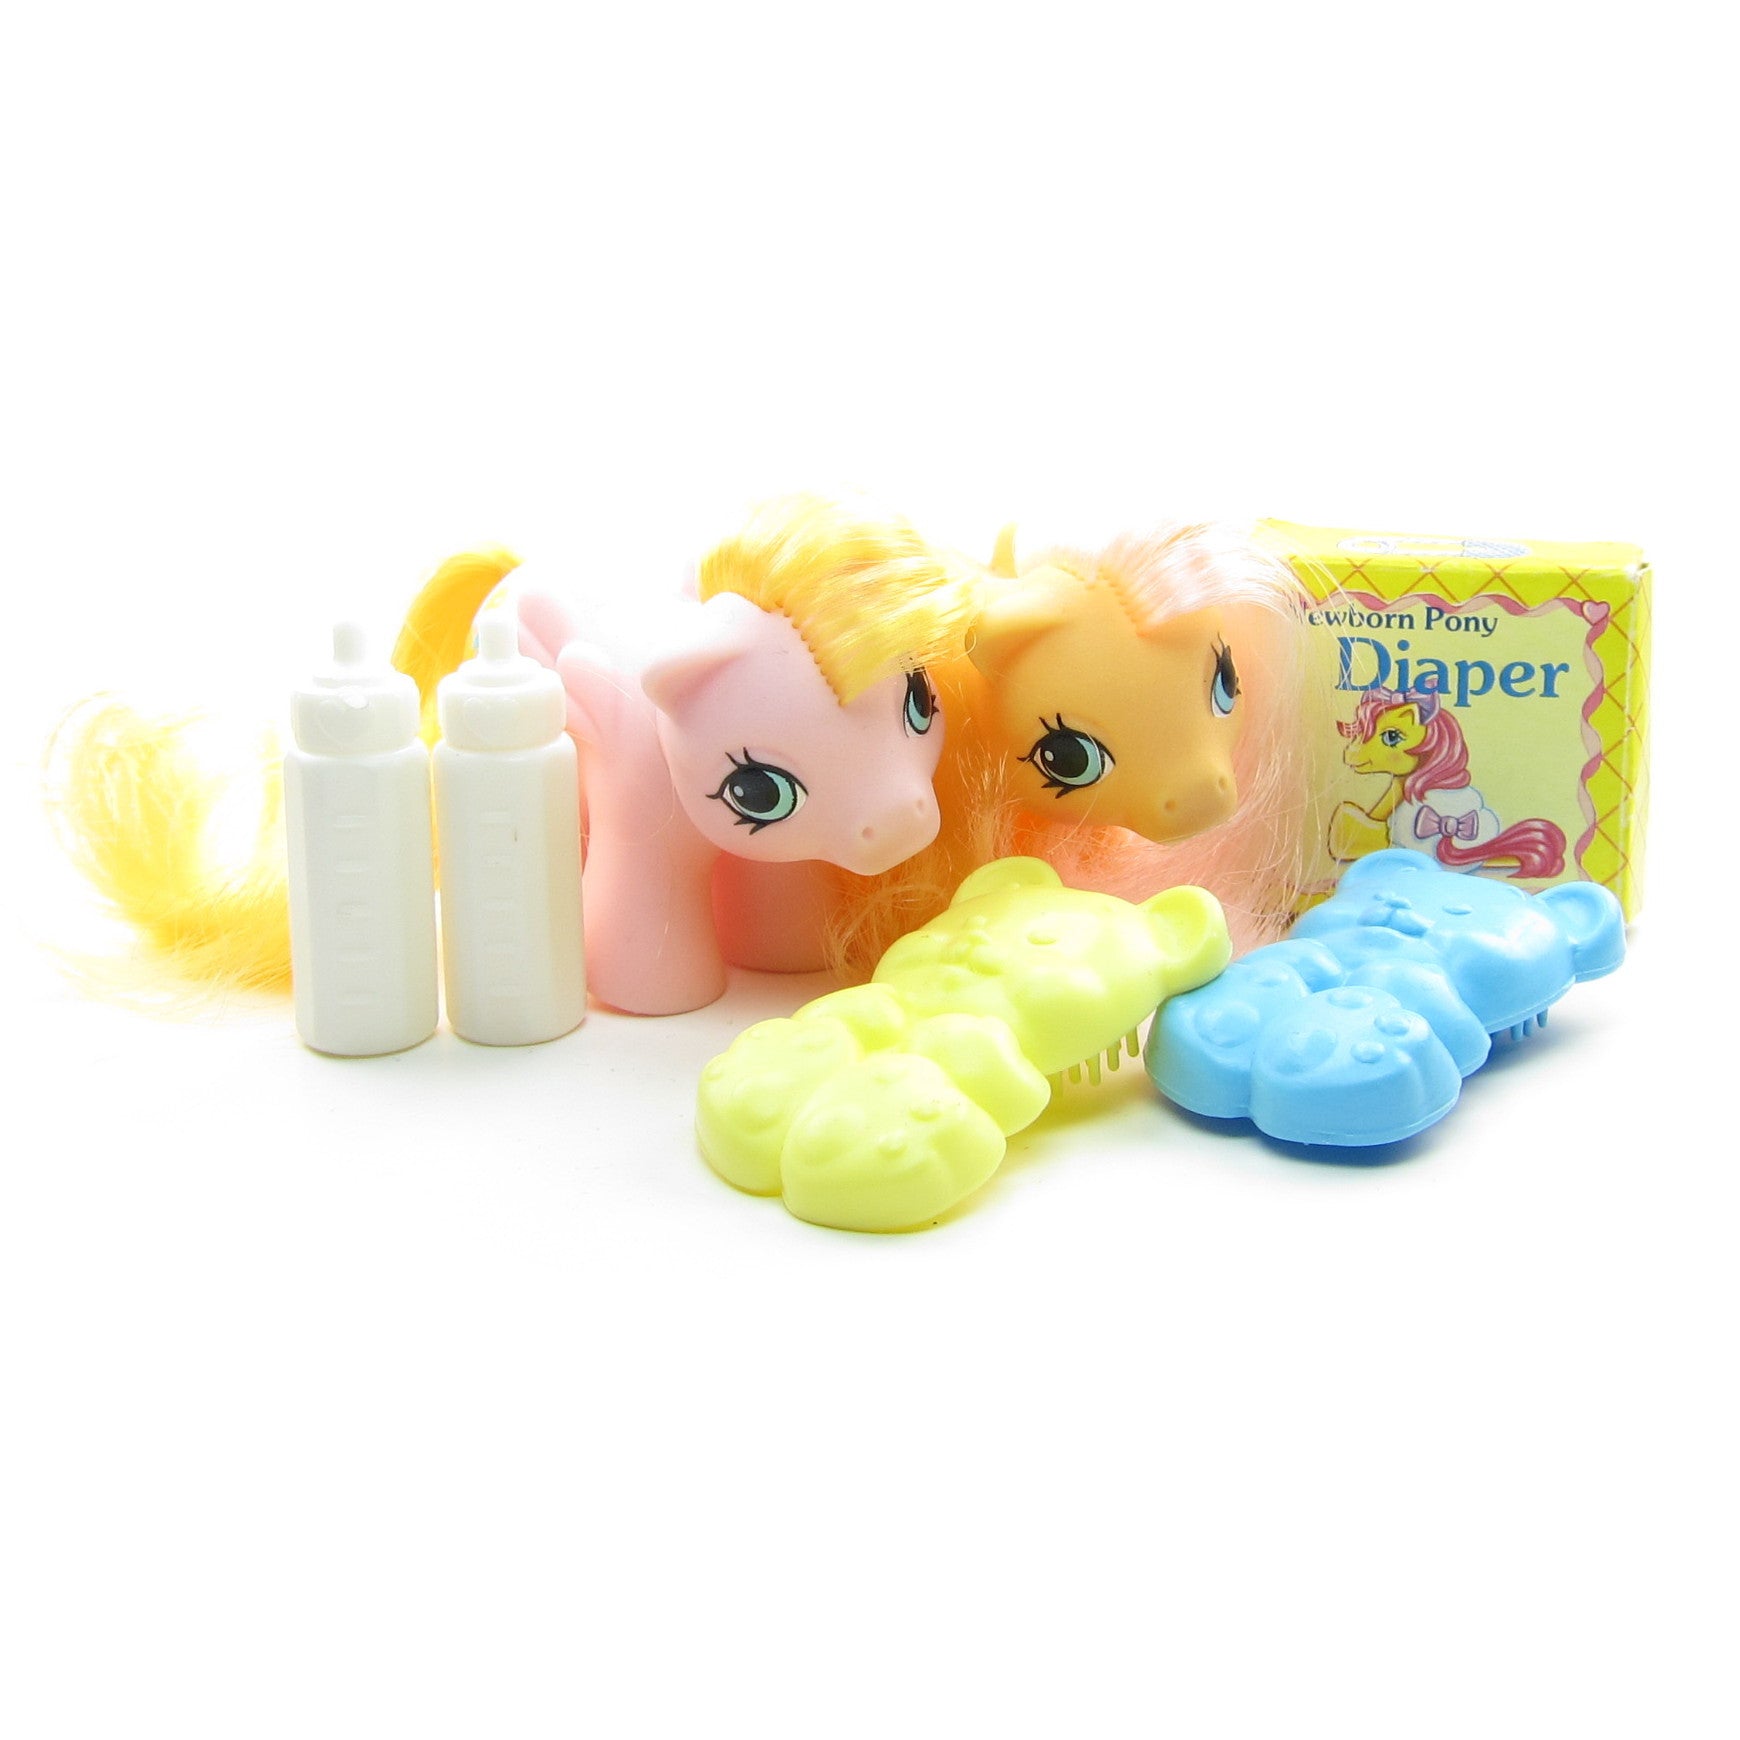 Dibbles Nibbles My Little Pony Newborn Twins with accessories